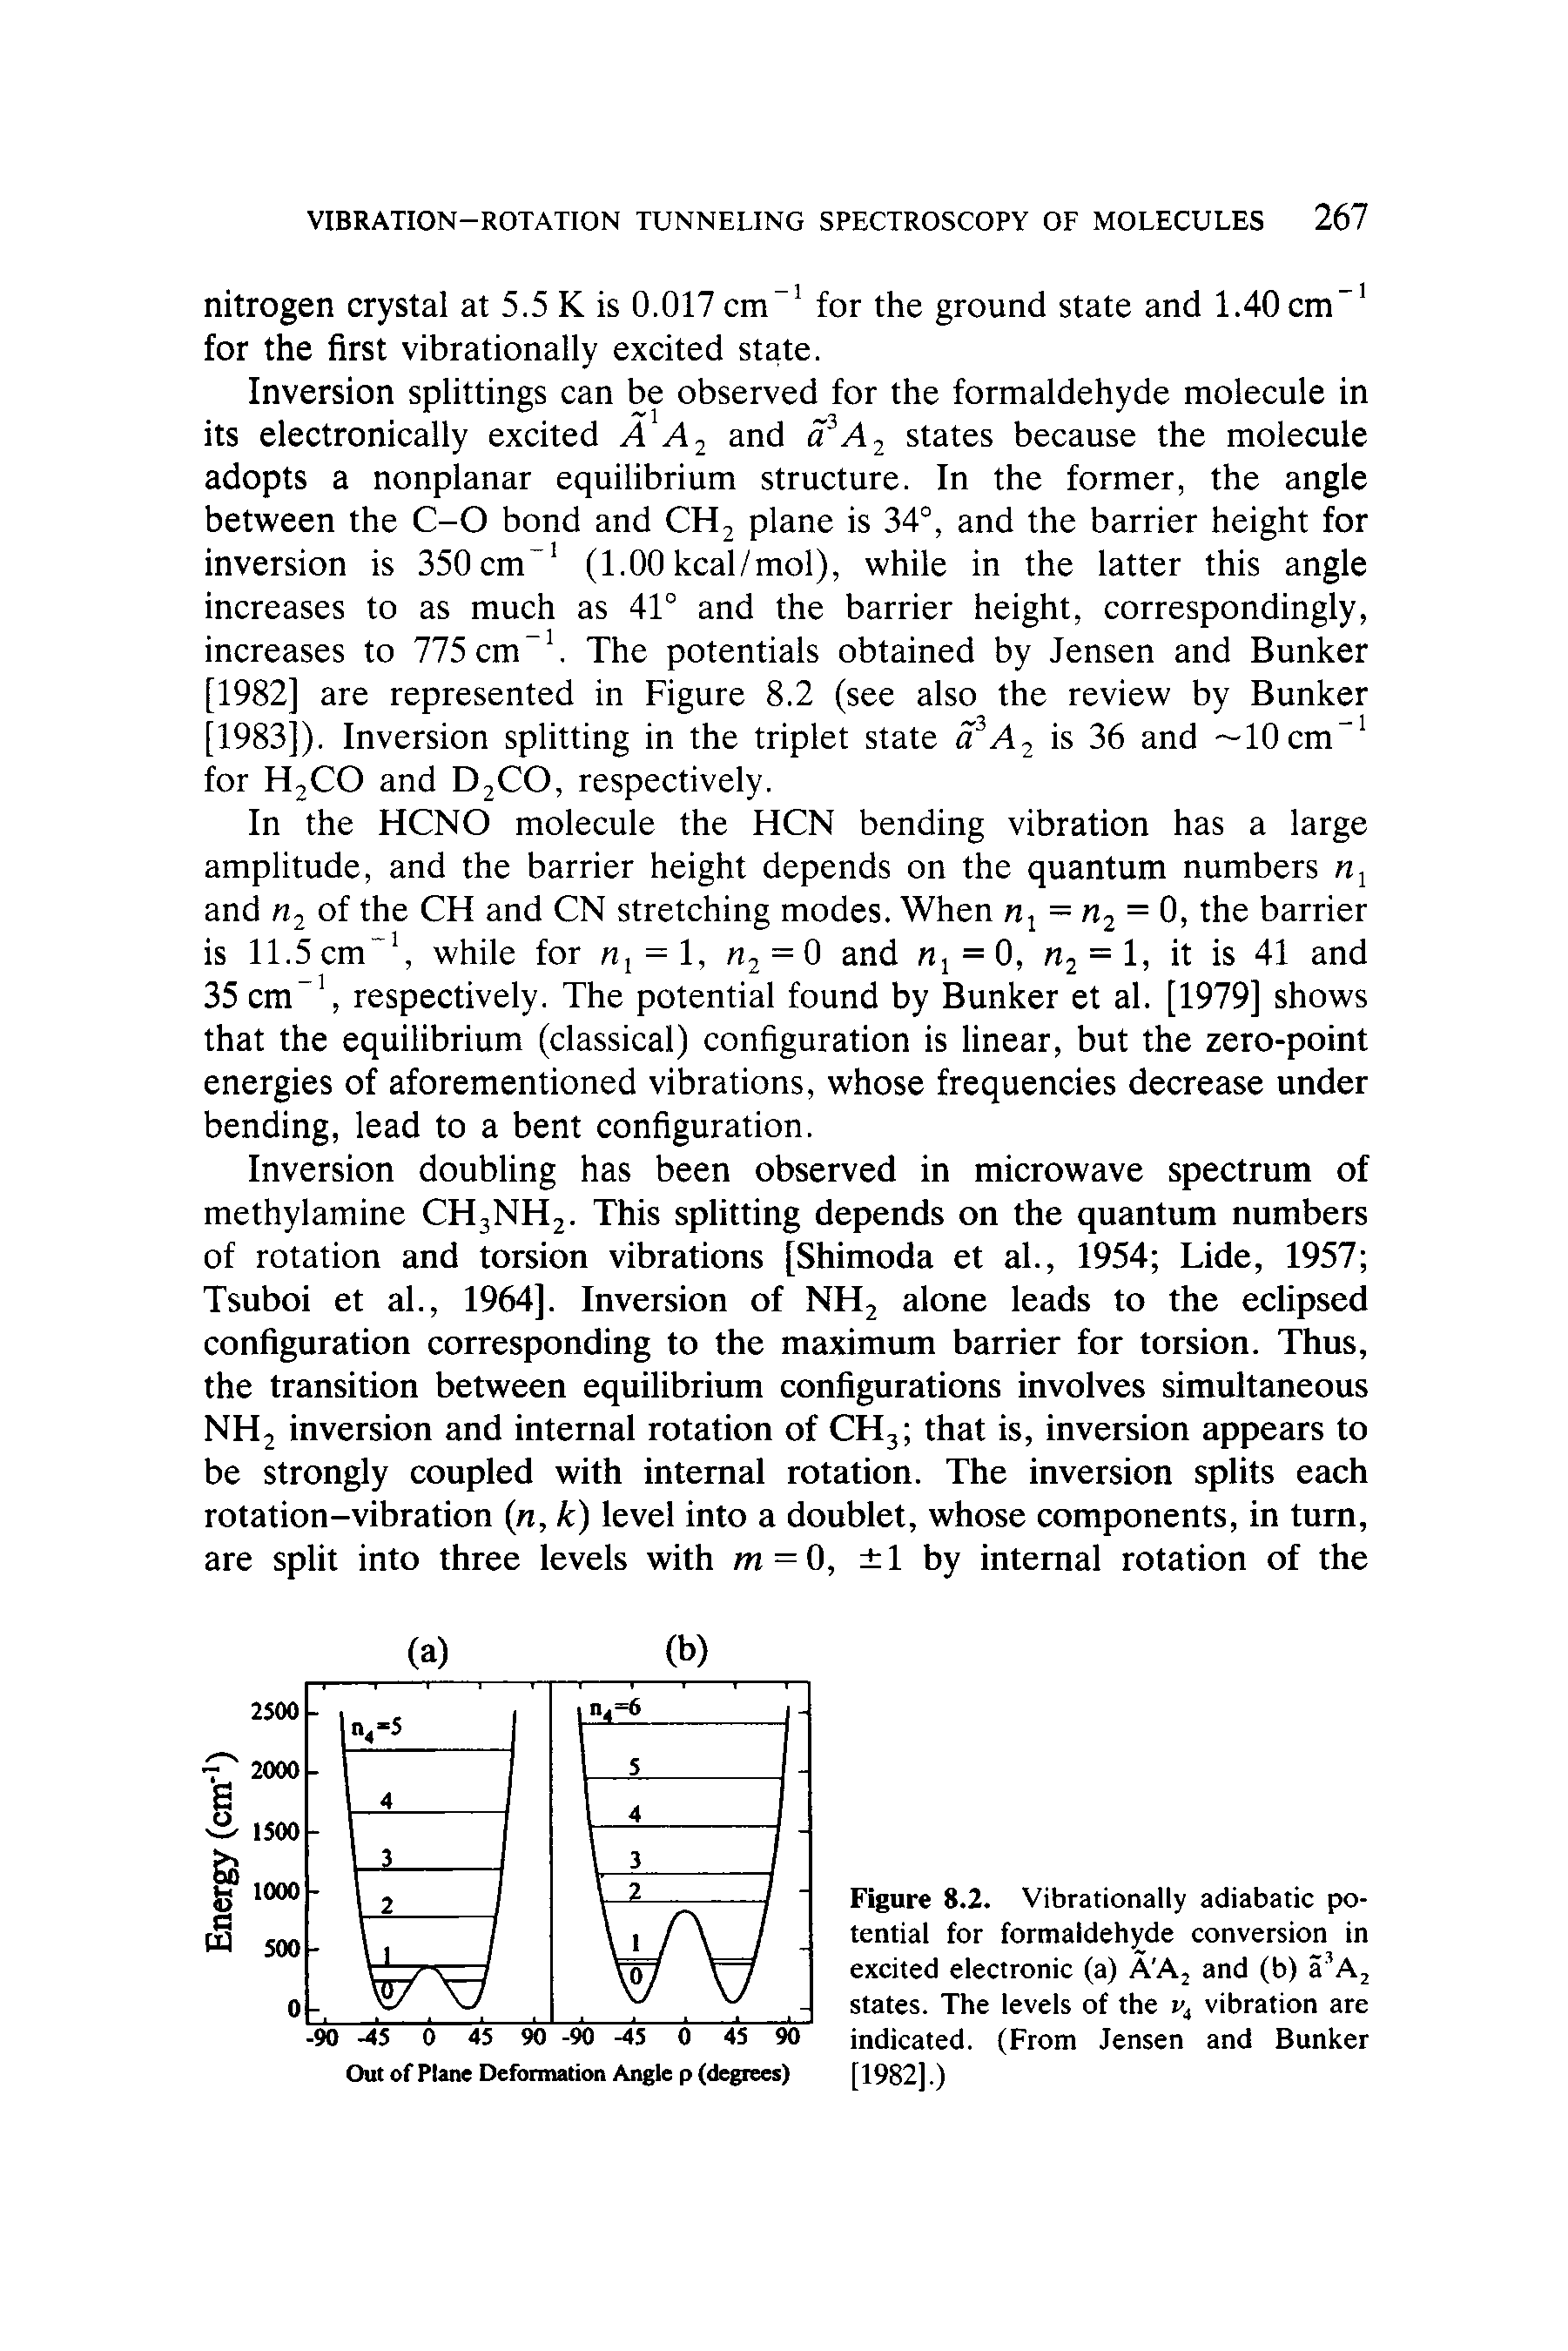 Figure 8.2. Vibrationally adiabatic potential for formaldehyde conversion in excited electronic (a) A A2 and (b) a3A2 states. The levels of the vt vibration are indicated. (From Jensen and Bunker [1982].)...